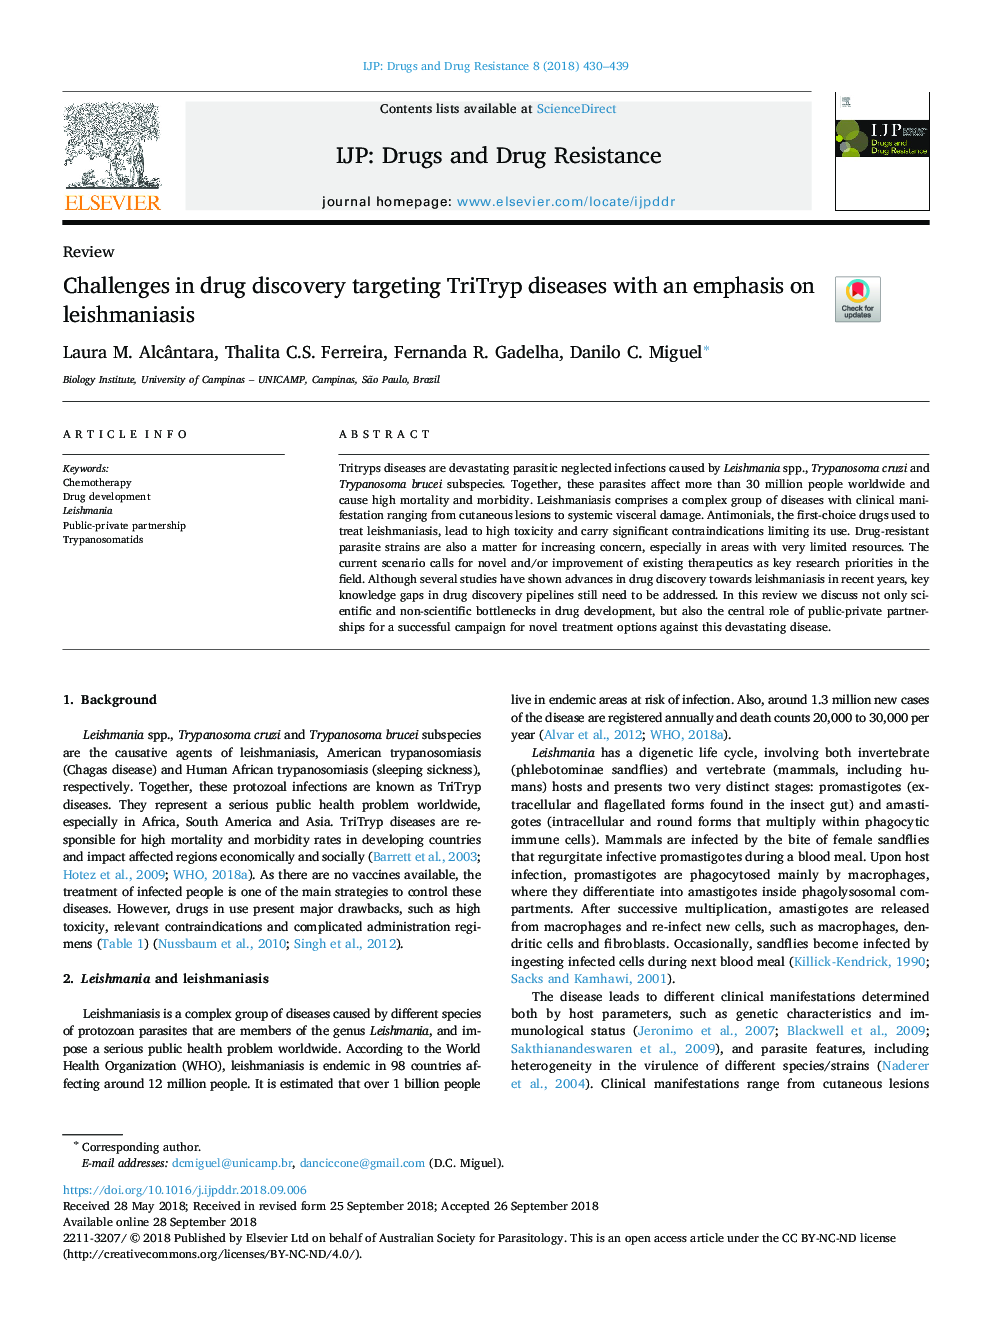 Challenges in drug discovery targeting TriTryp diseases with an emphasis on leishmaniasis